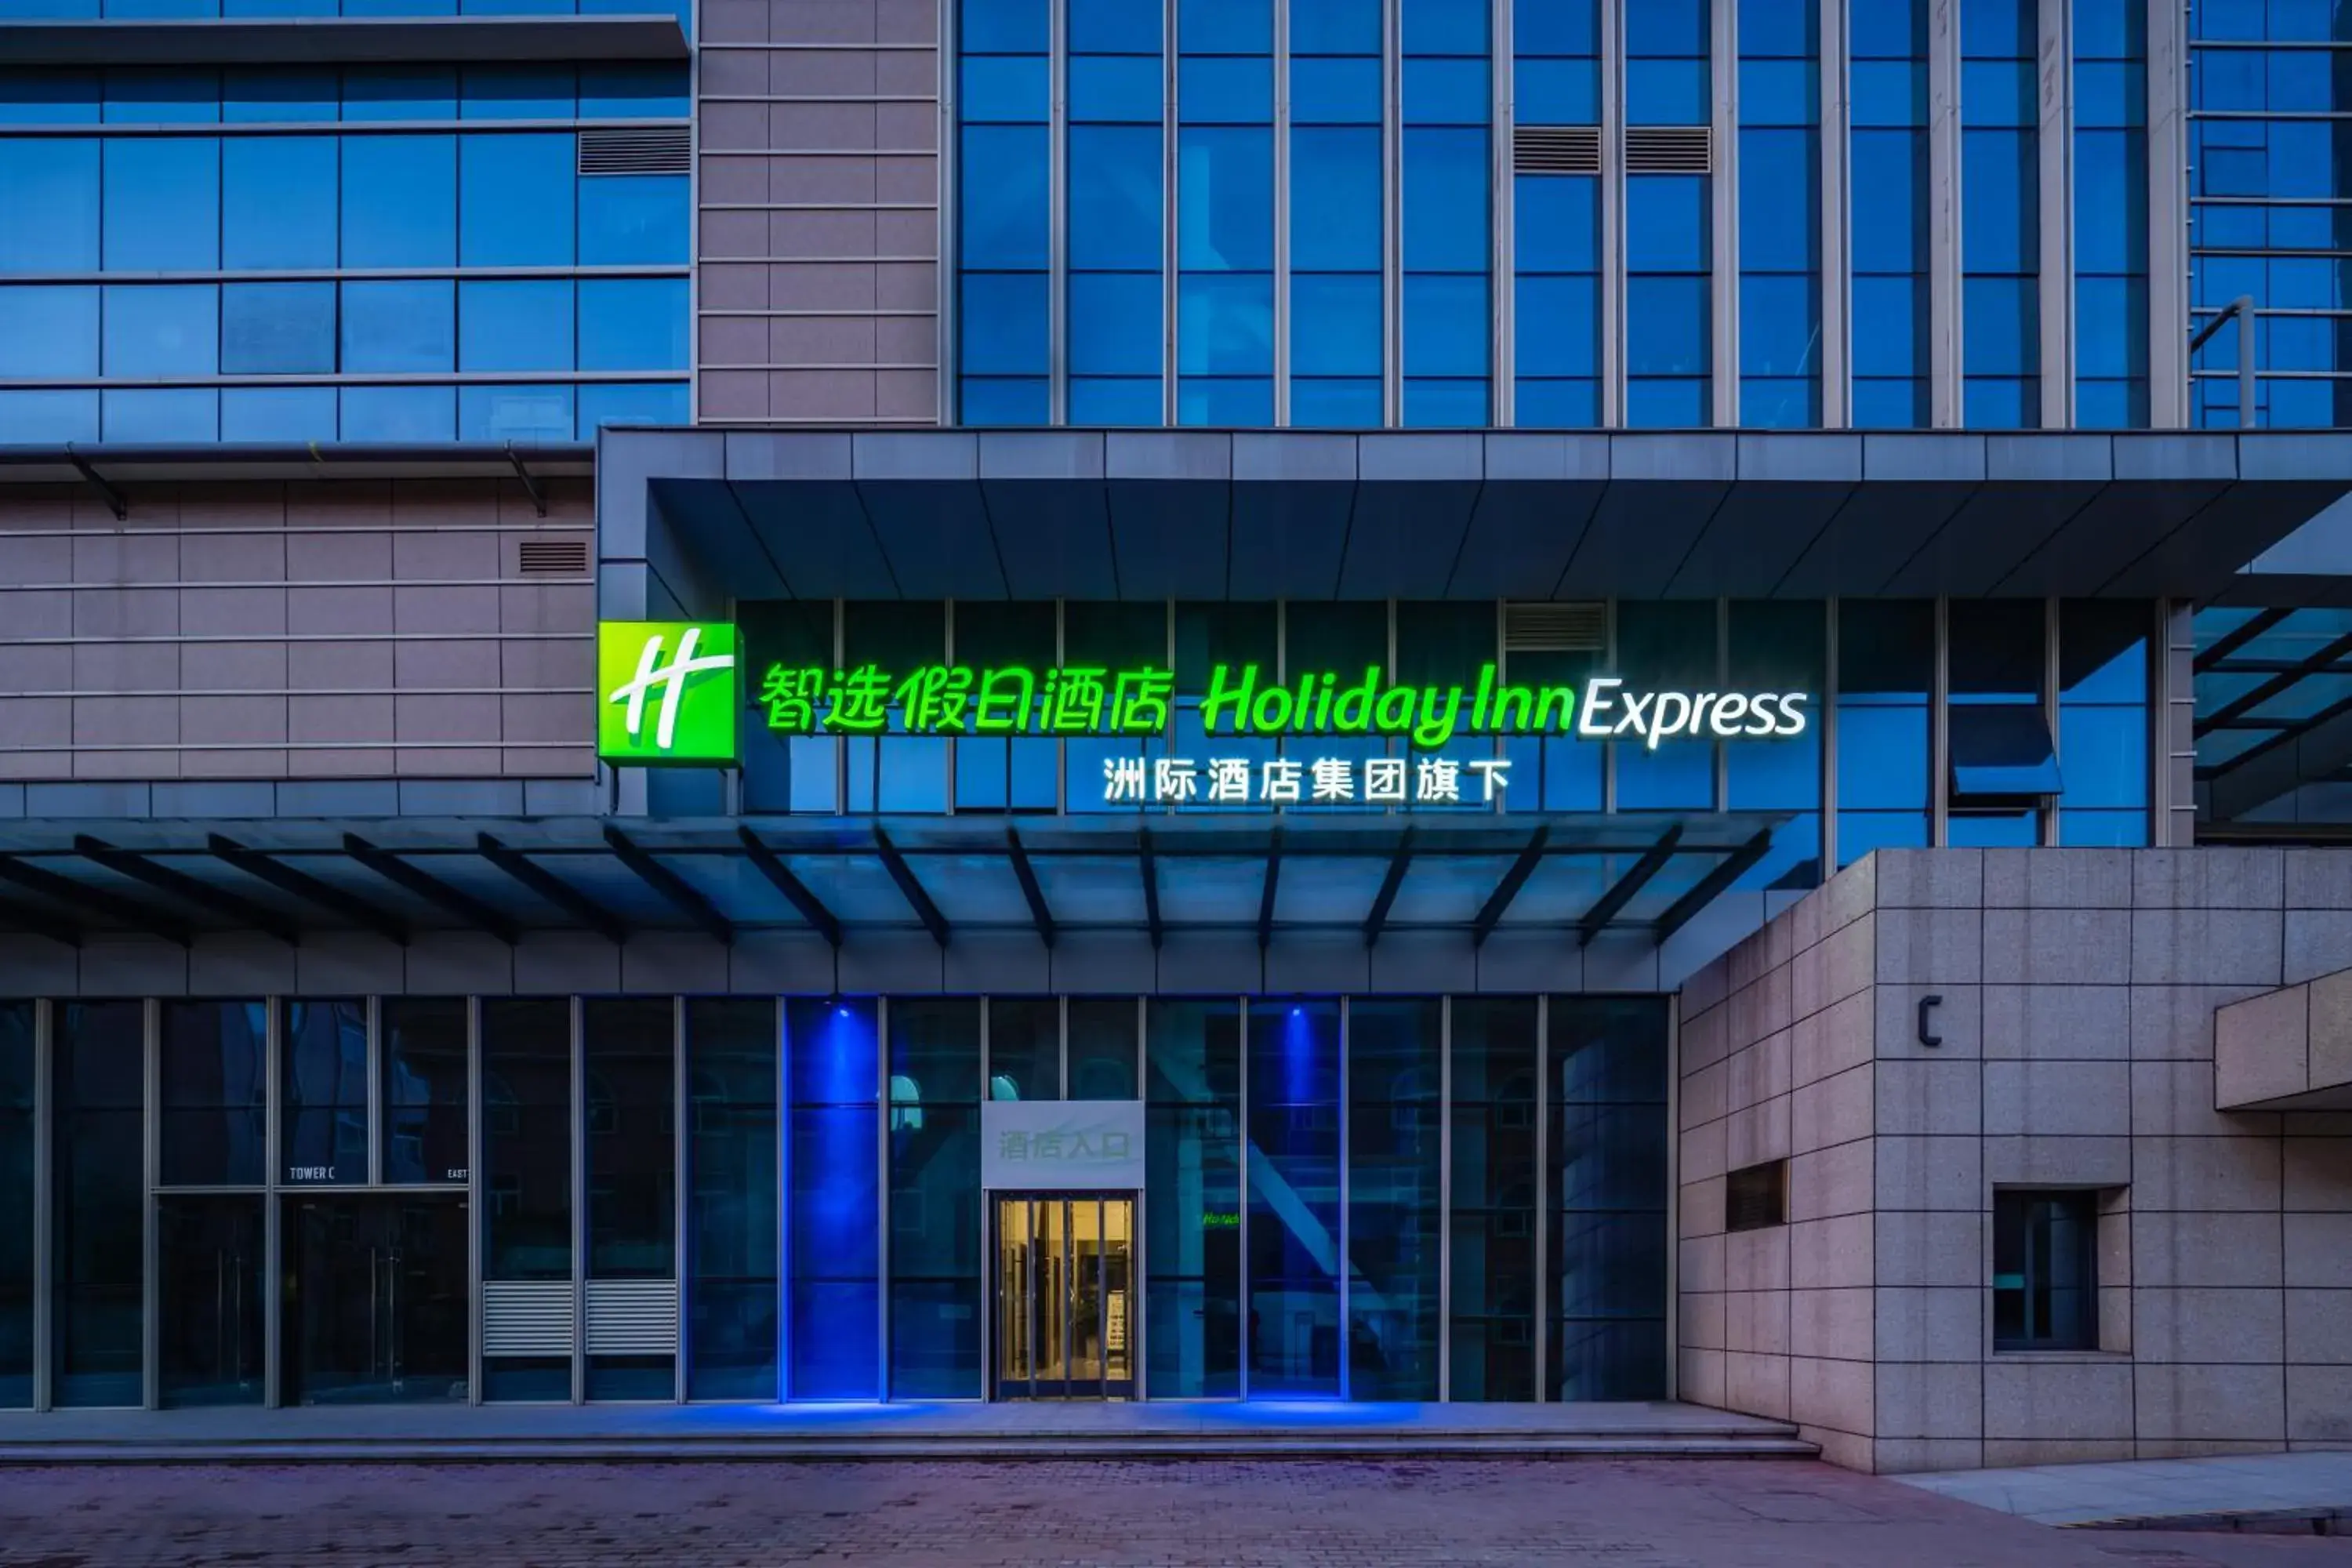 Property Building in Holiday Inn Express Xi'an Tuanjie South Road